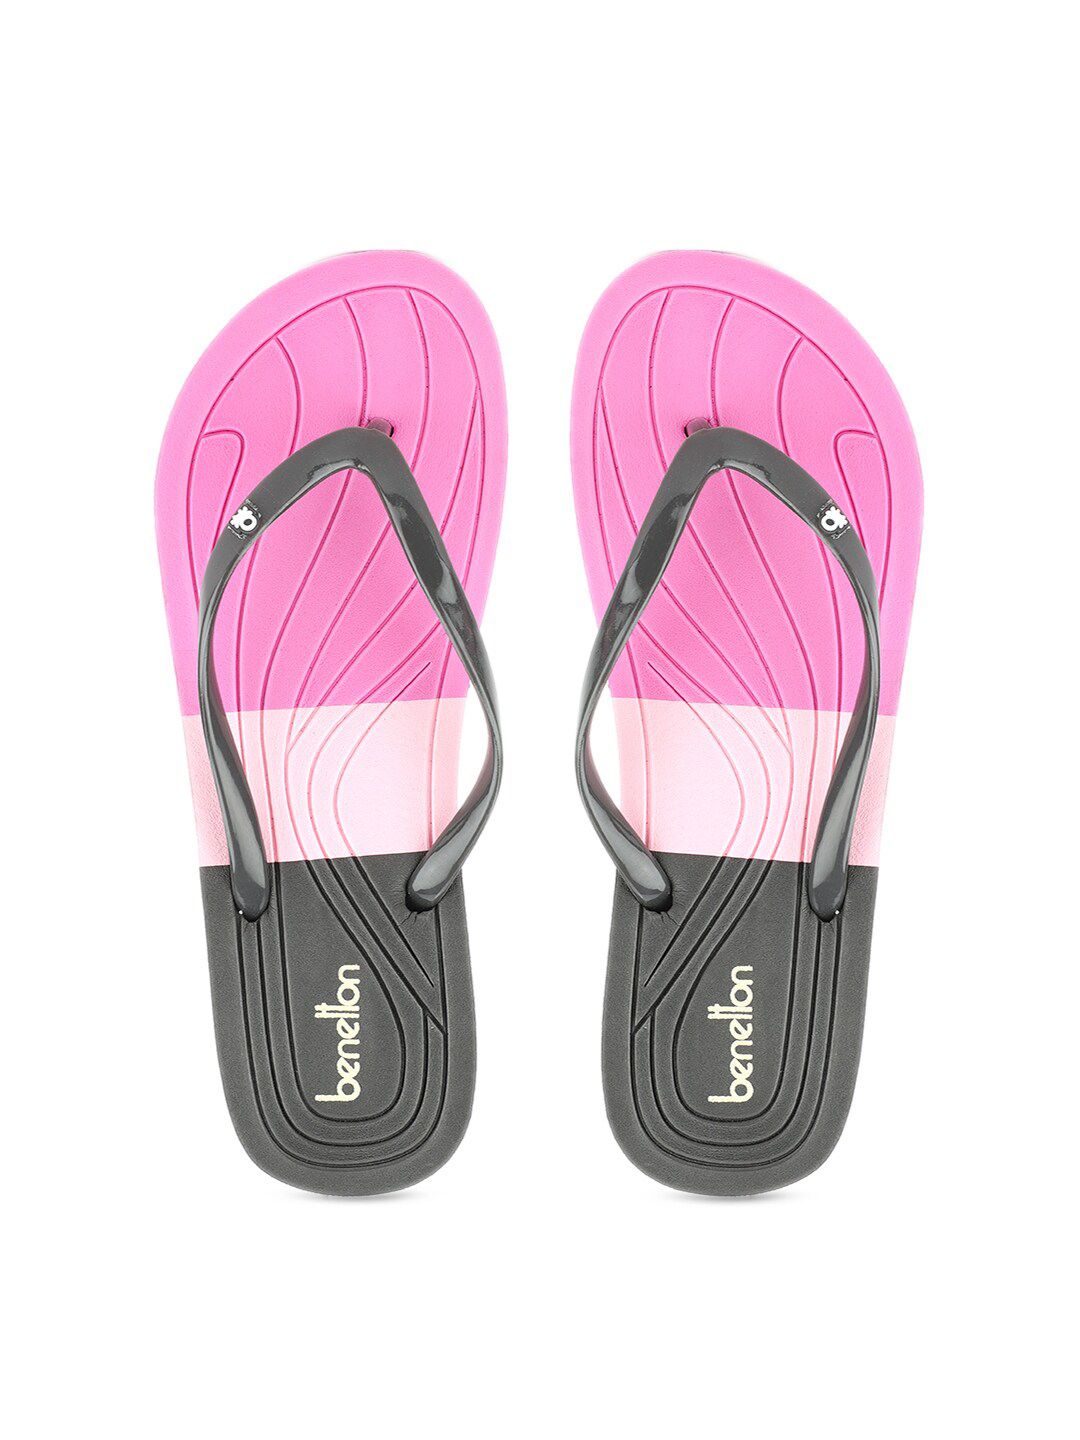 United Colors of Benetton Women Grey & Pink Colourblocked Rubber Thong Flip-Flops Price in India